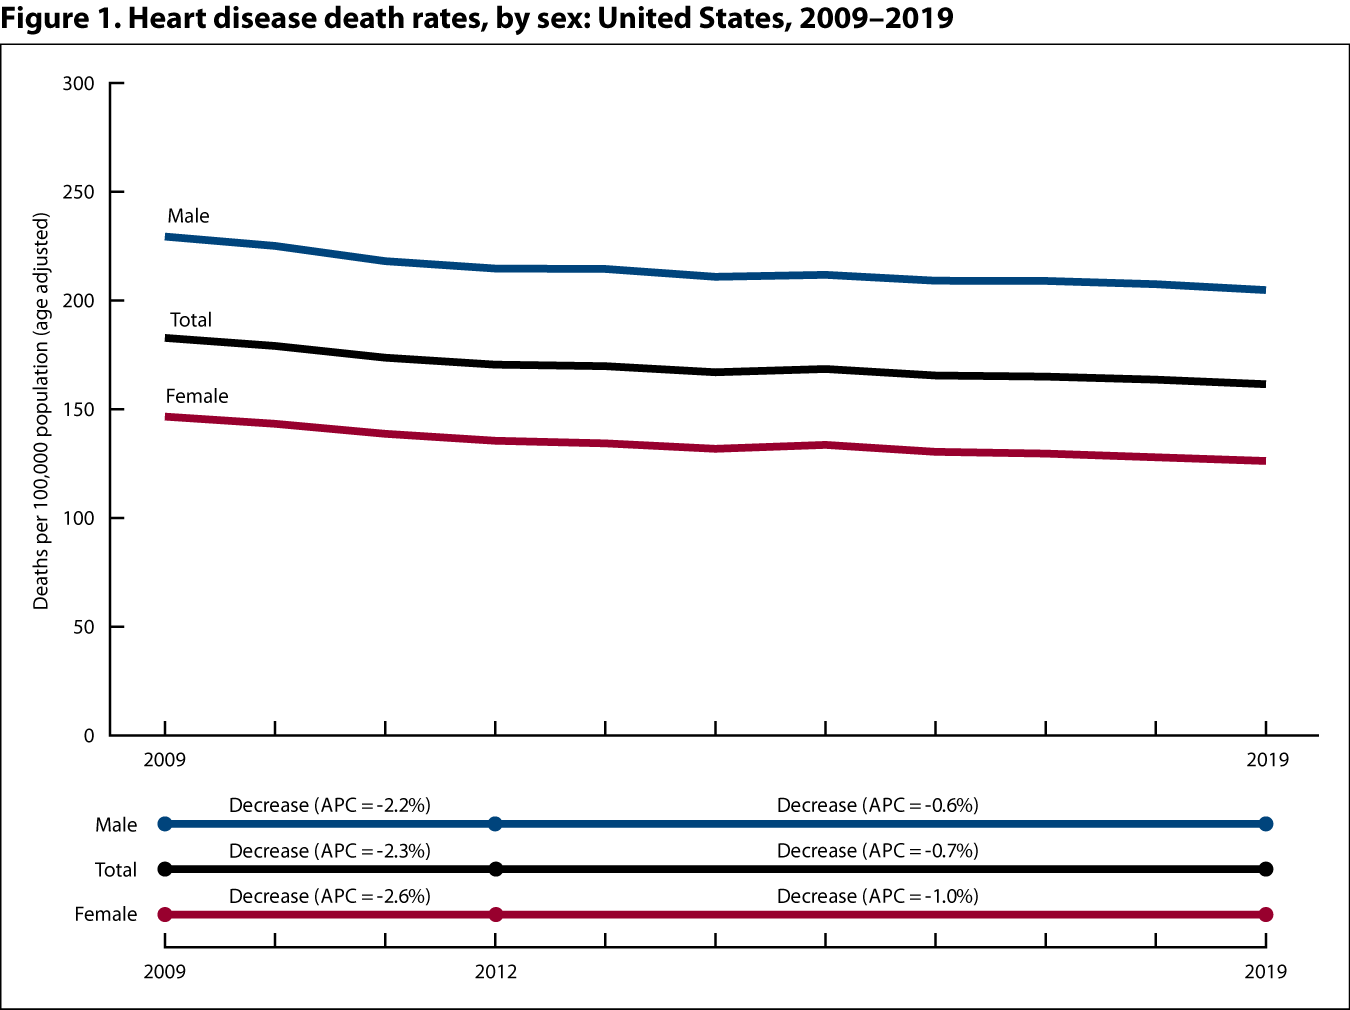 Figure 1 is a line graph showing heart disease death rates (deaths per 100,000 population) by sex for 2009 through 2019.